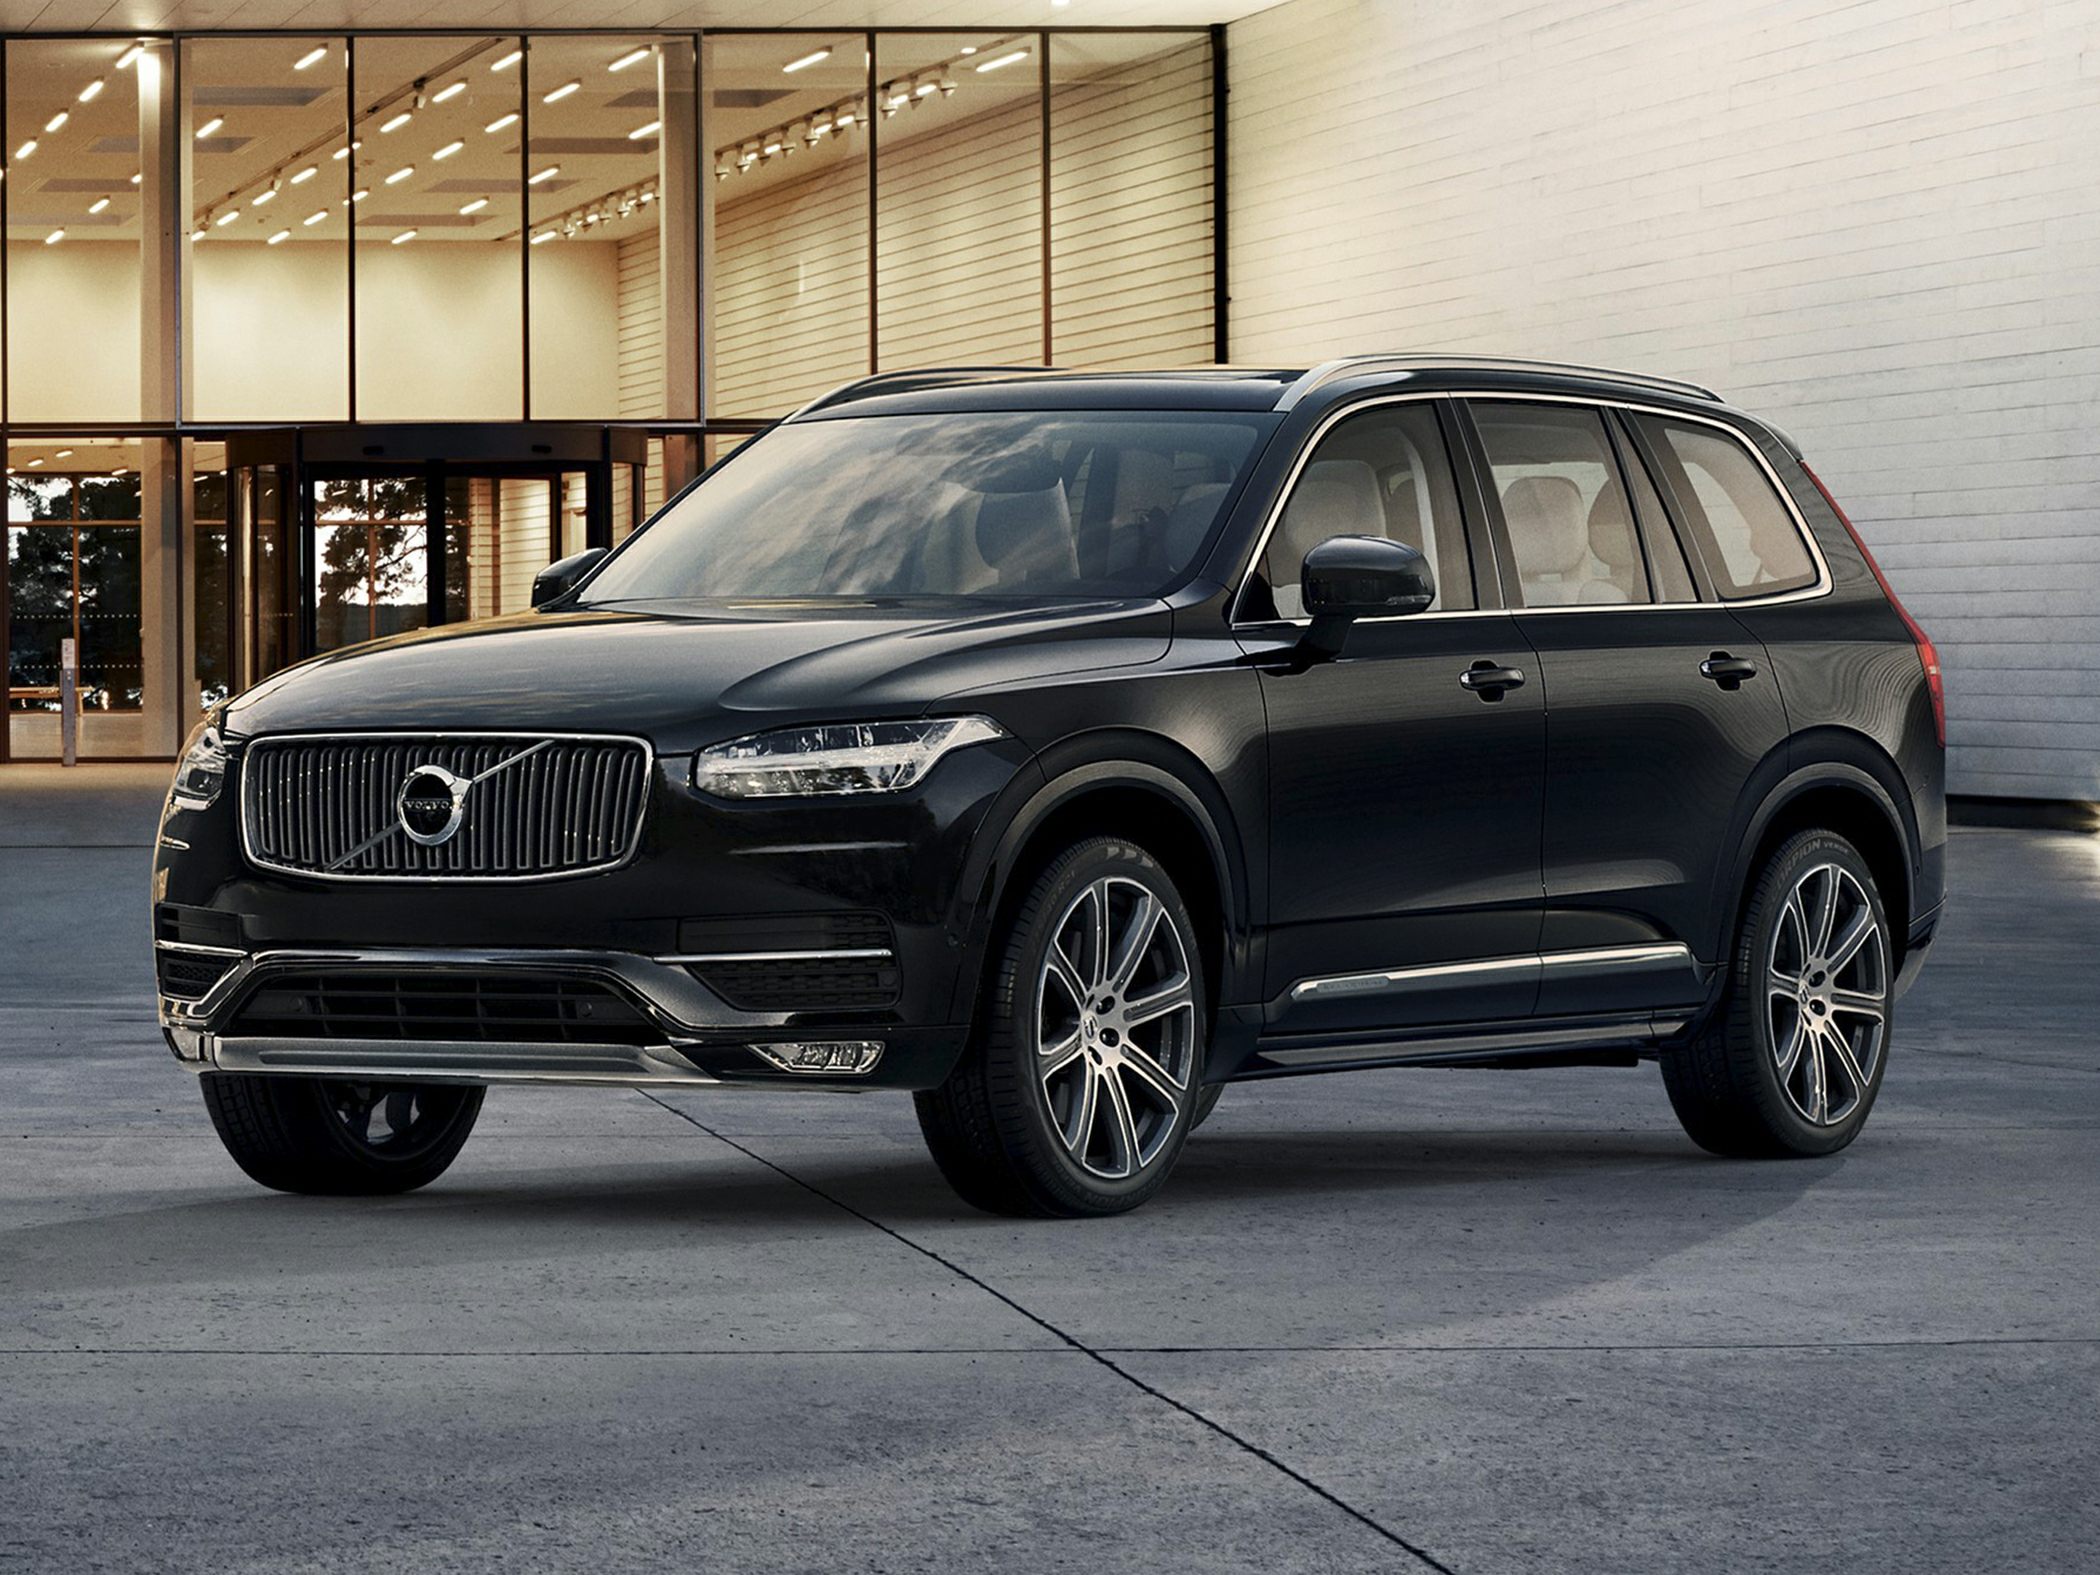 2017 Volvo Xc90 Deals S Incentives Leases Overview